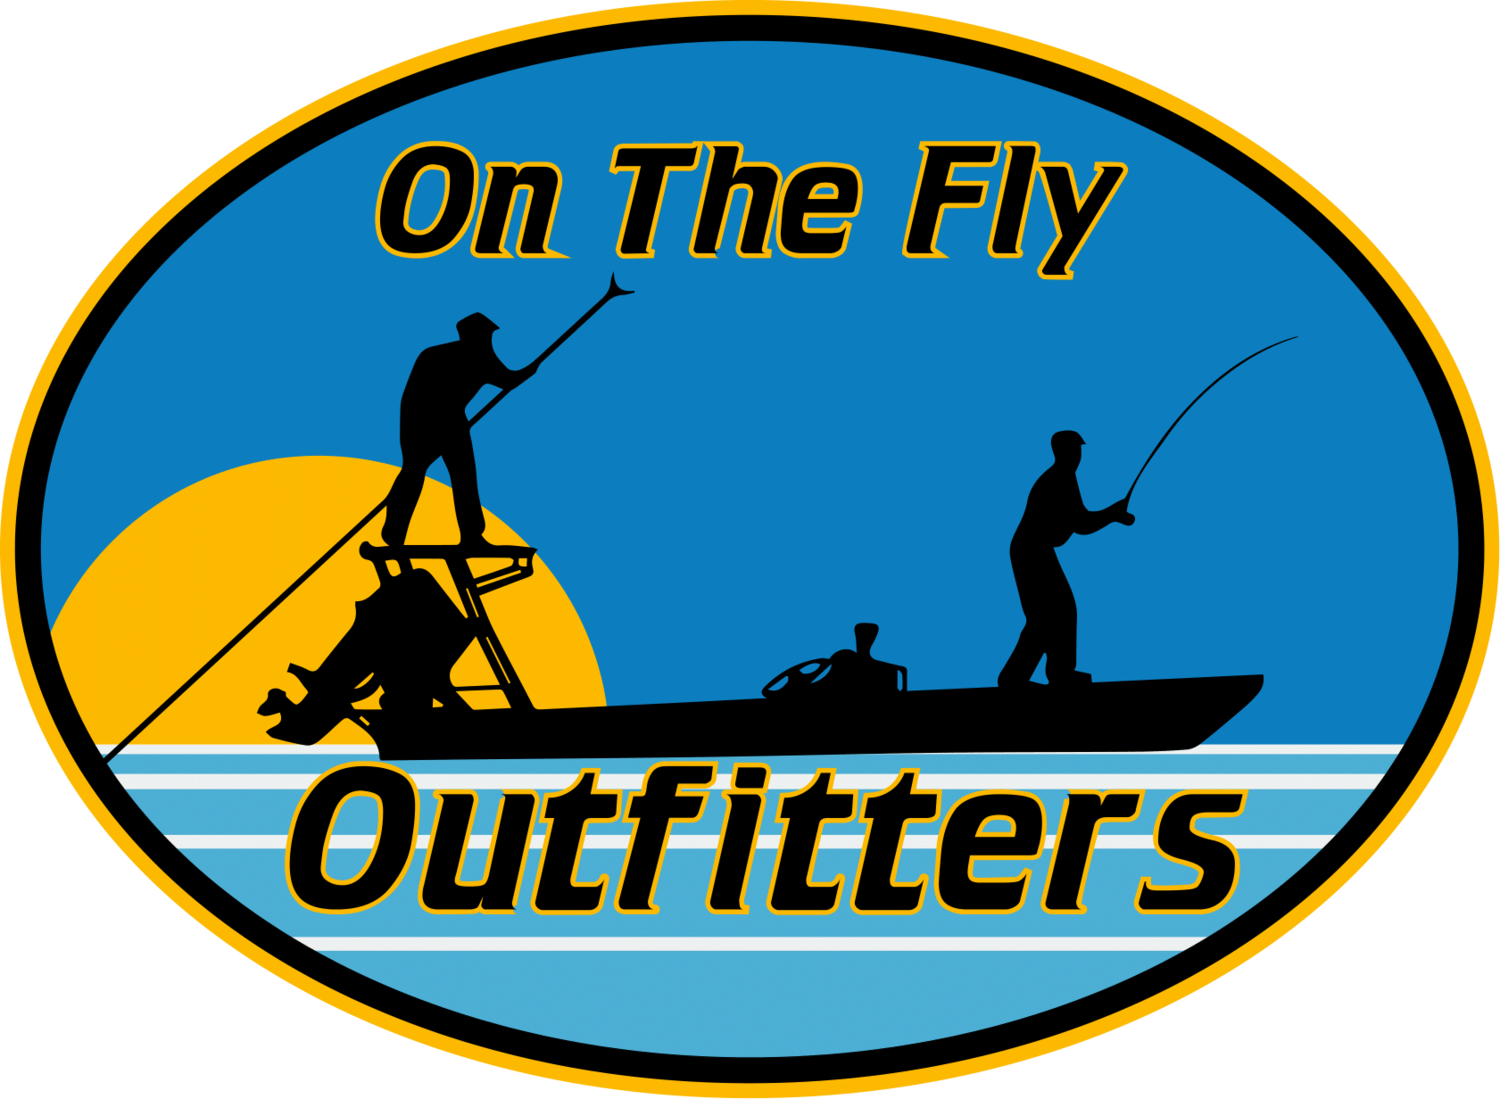 On The Fly Outfitters